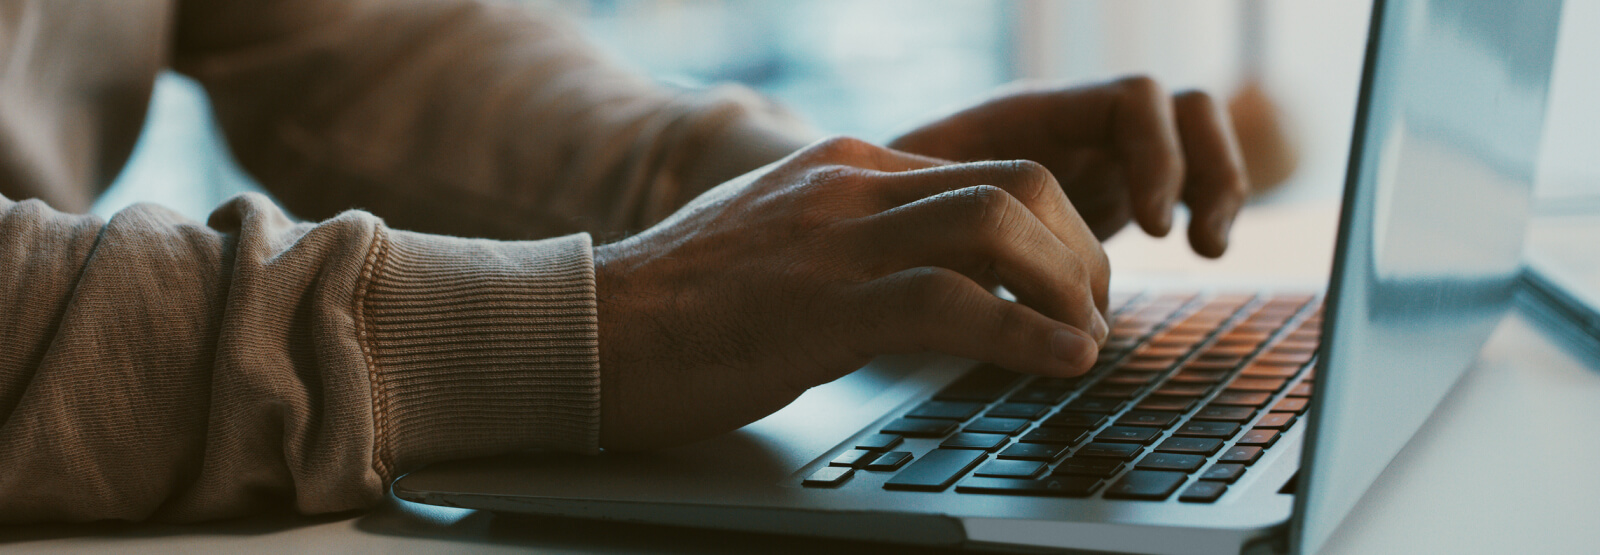 Close up of hands typing on a laptop